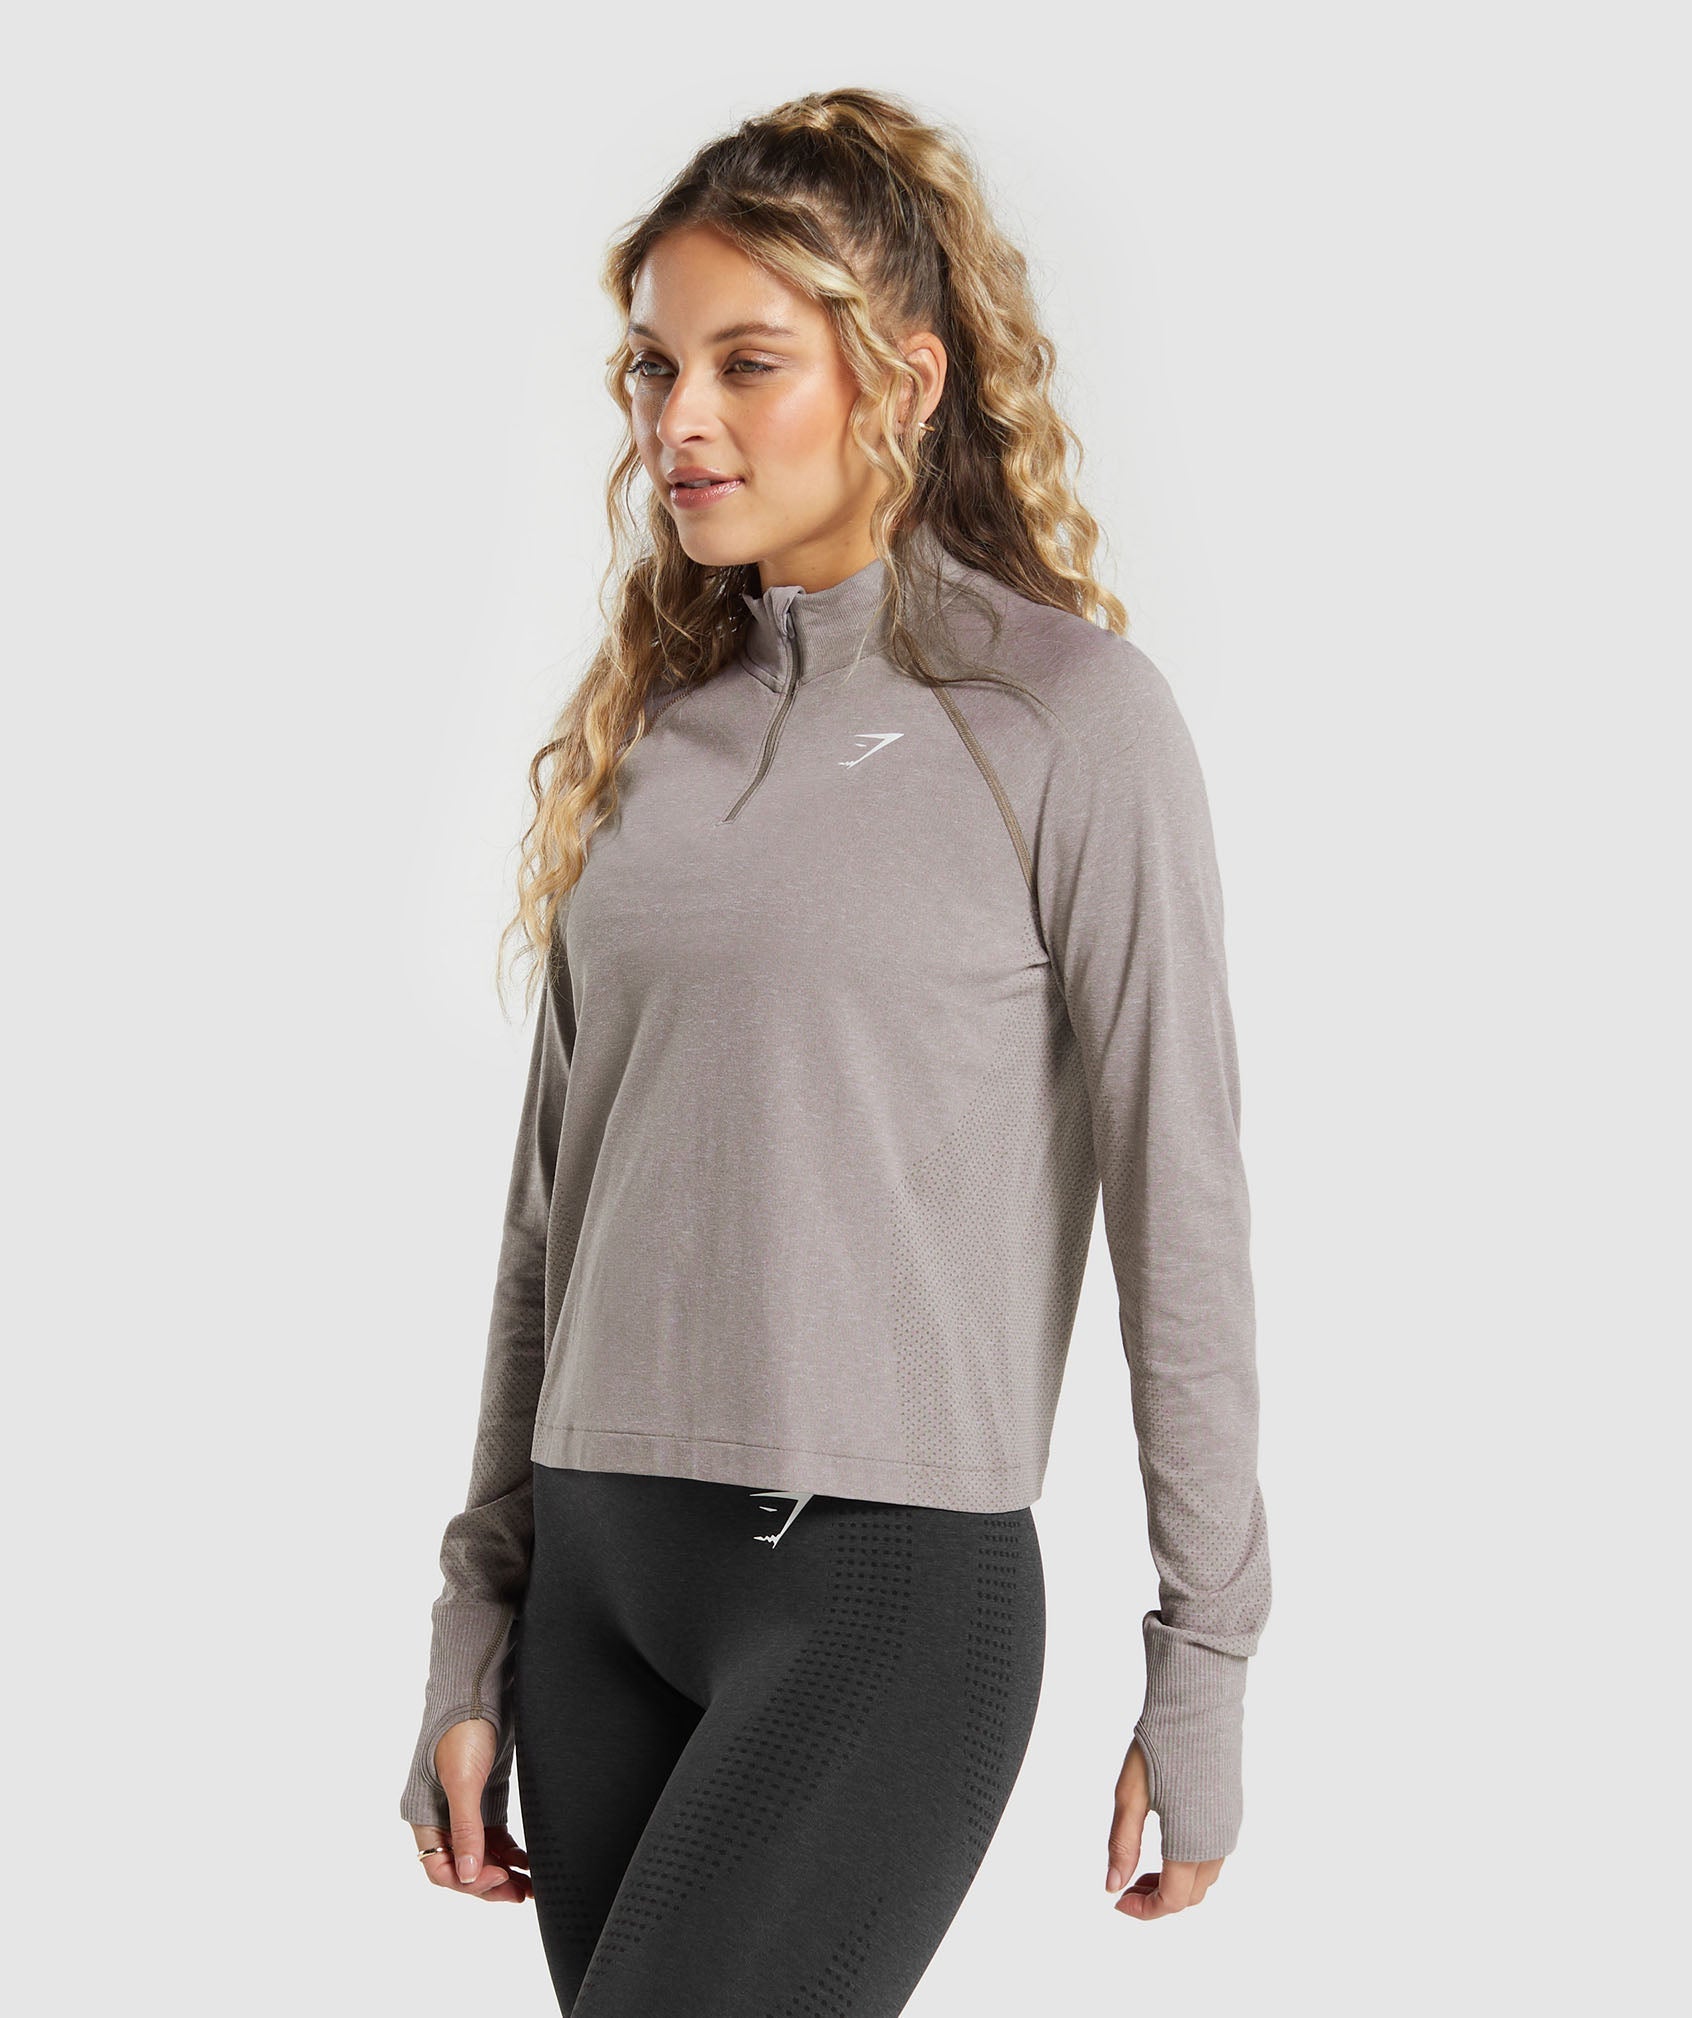 Vital Seamless 2.0 1/4 Zip in Warm Taupe Marl - view 3